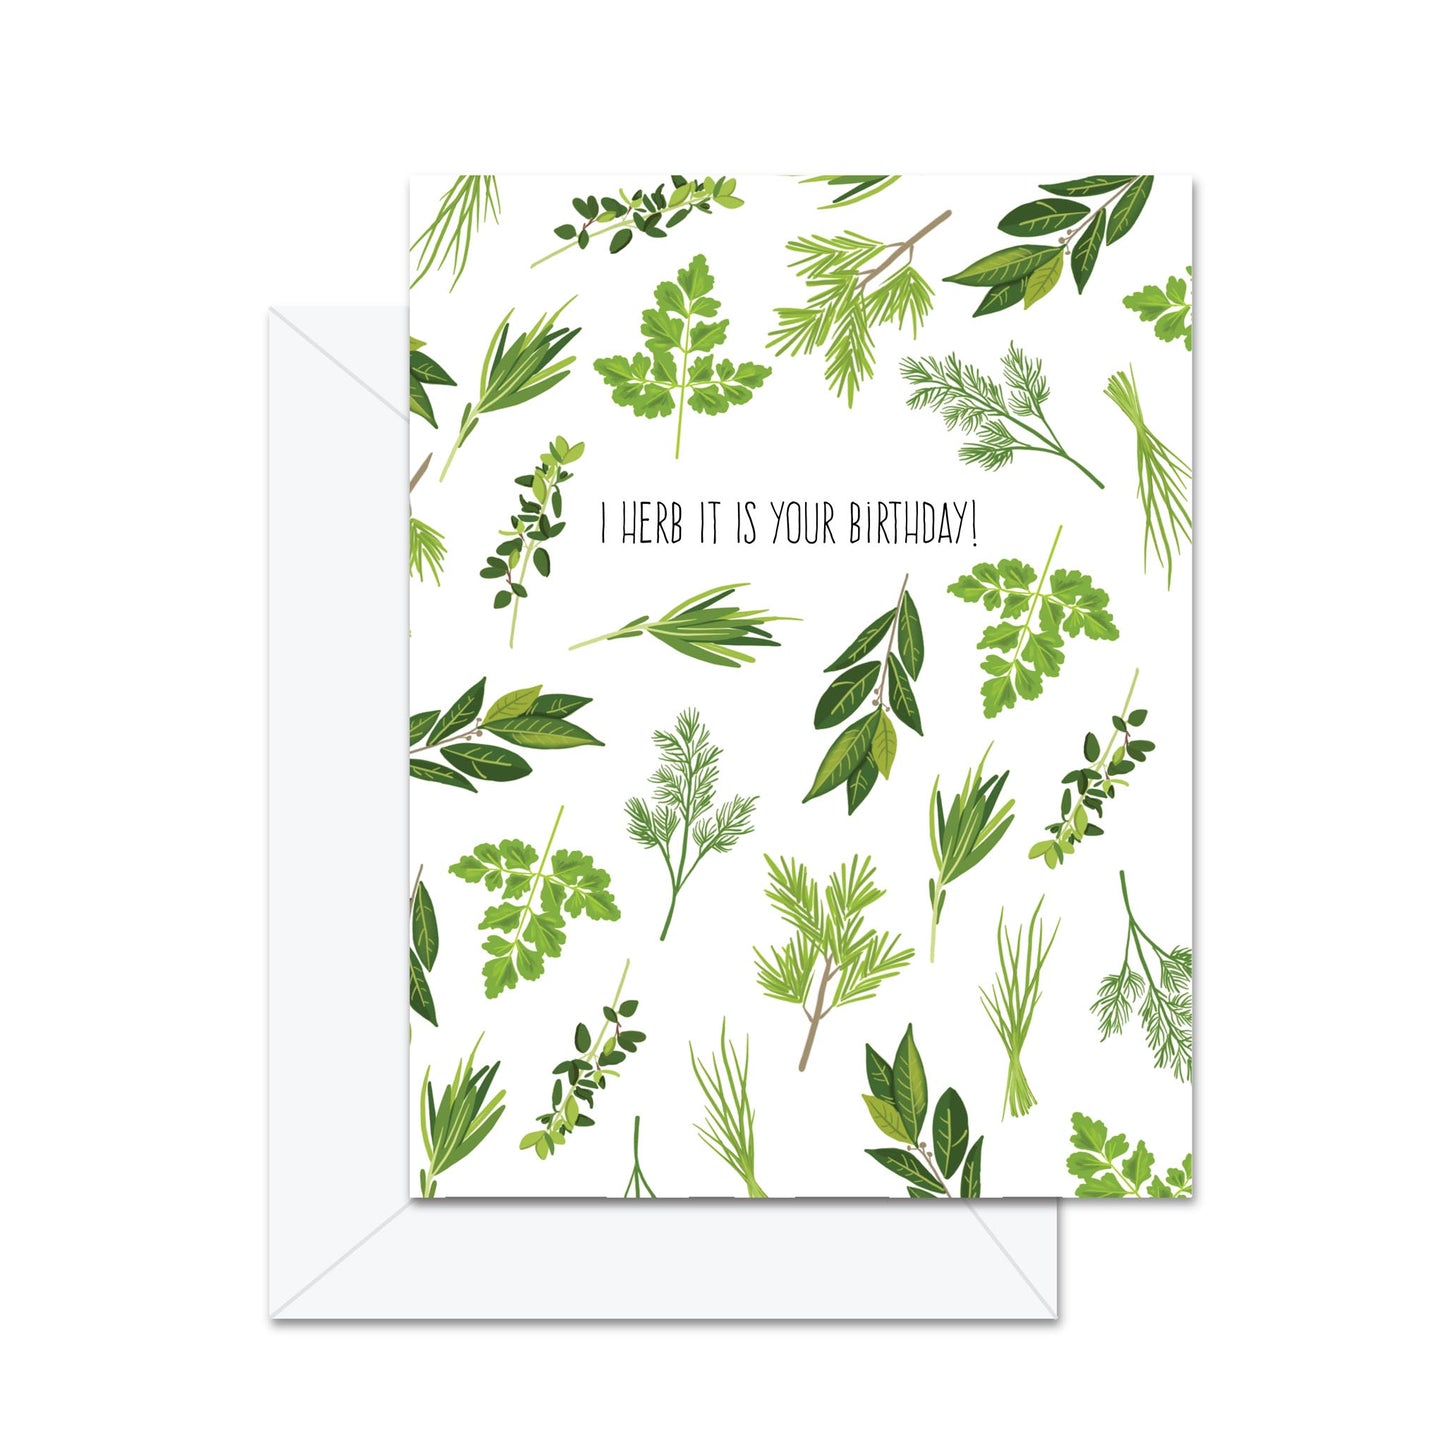 I Herb It Is Your Birthday! - Greeting Card